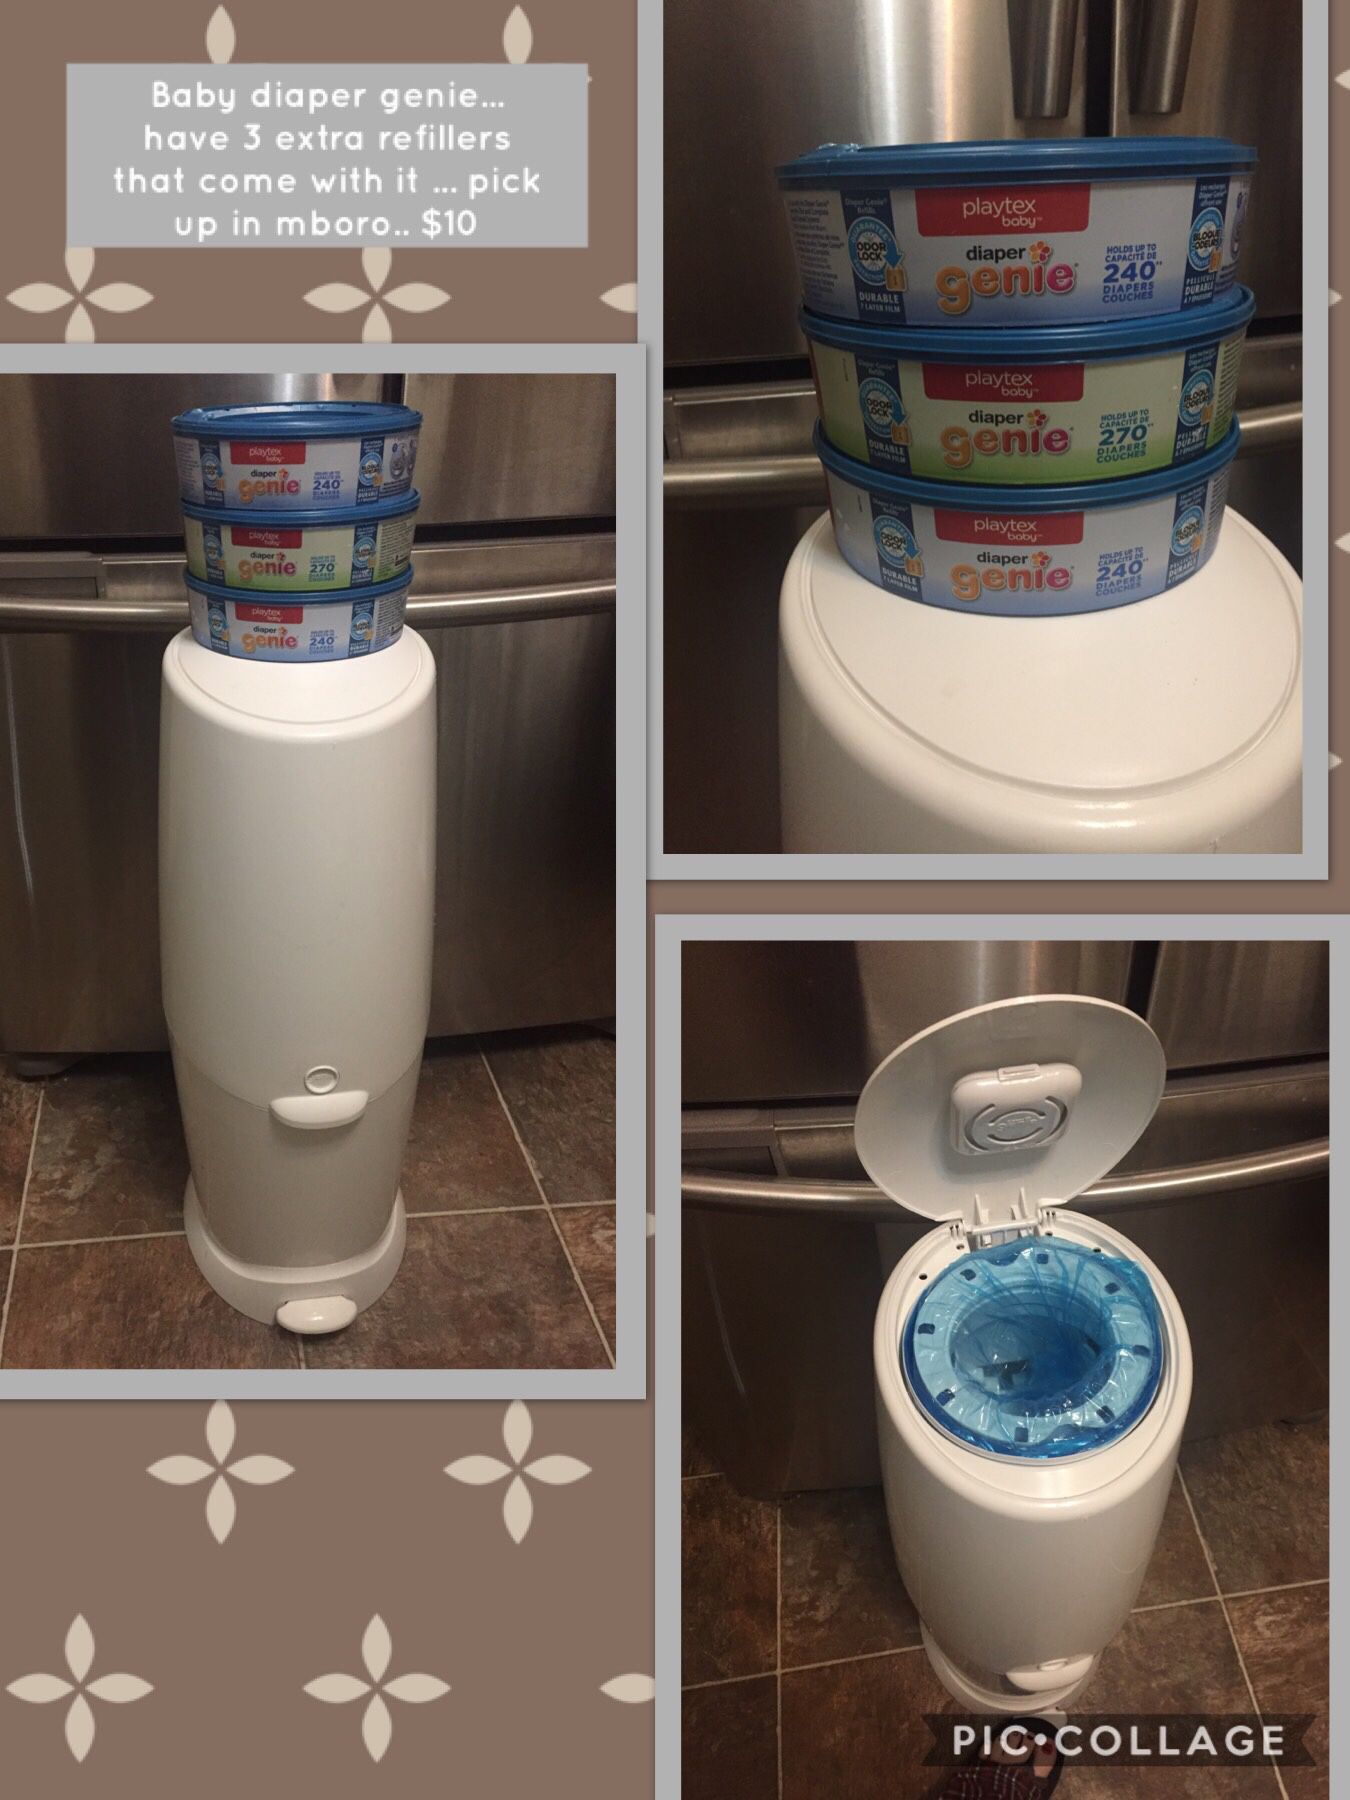 Baby diaper genie... have 3 extra refillers that come with it ... pick up in mboro.. $10